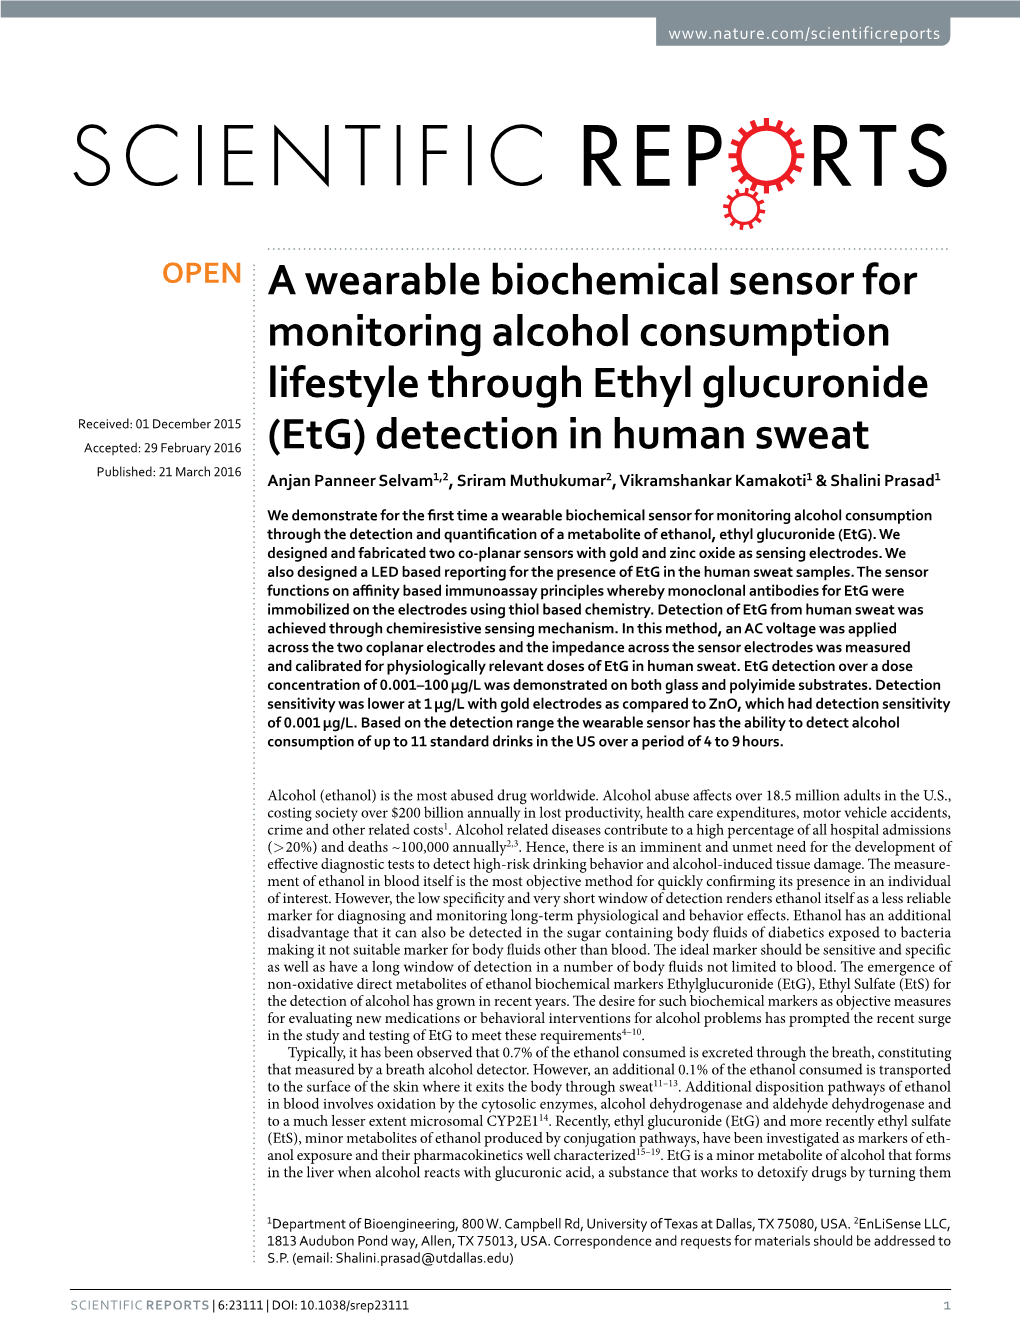 A Wearable Biochemical Sensor for Monitoring Alcohol Consumption